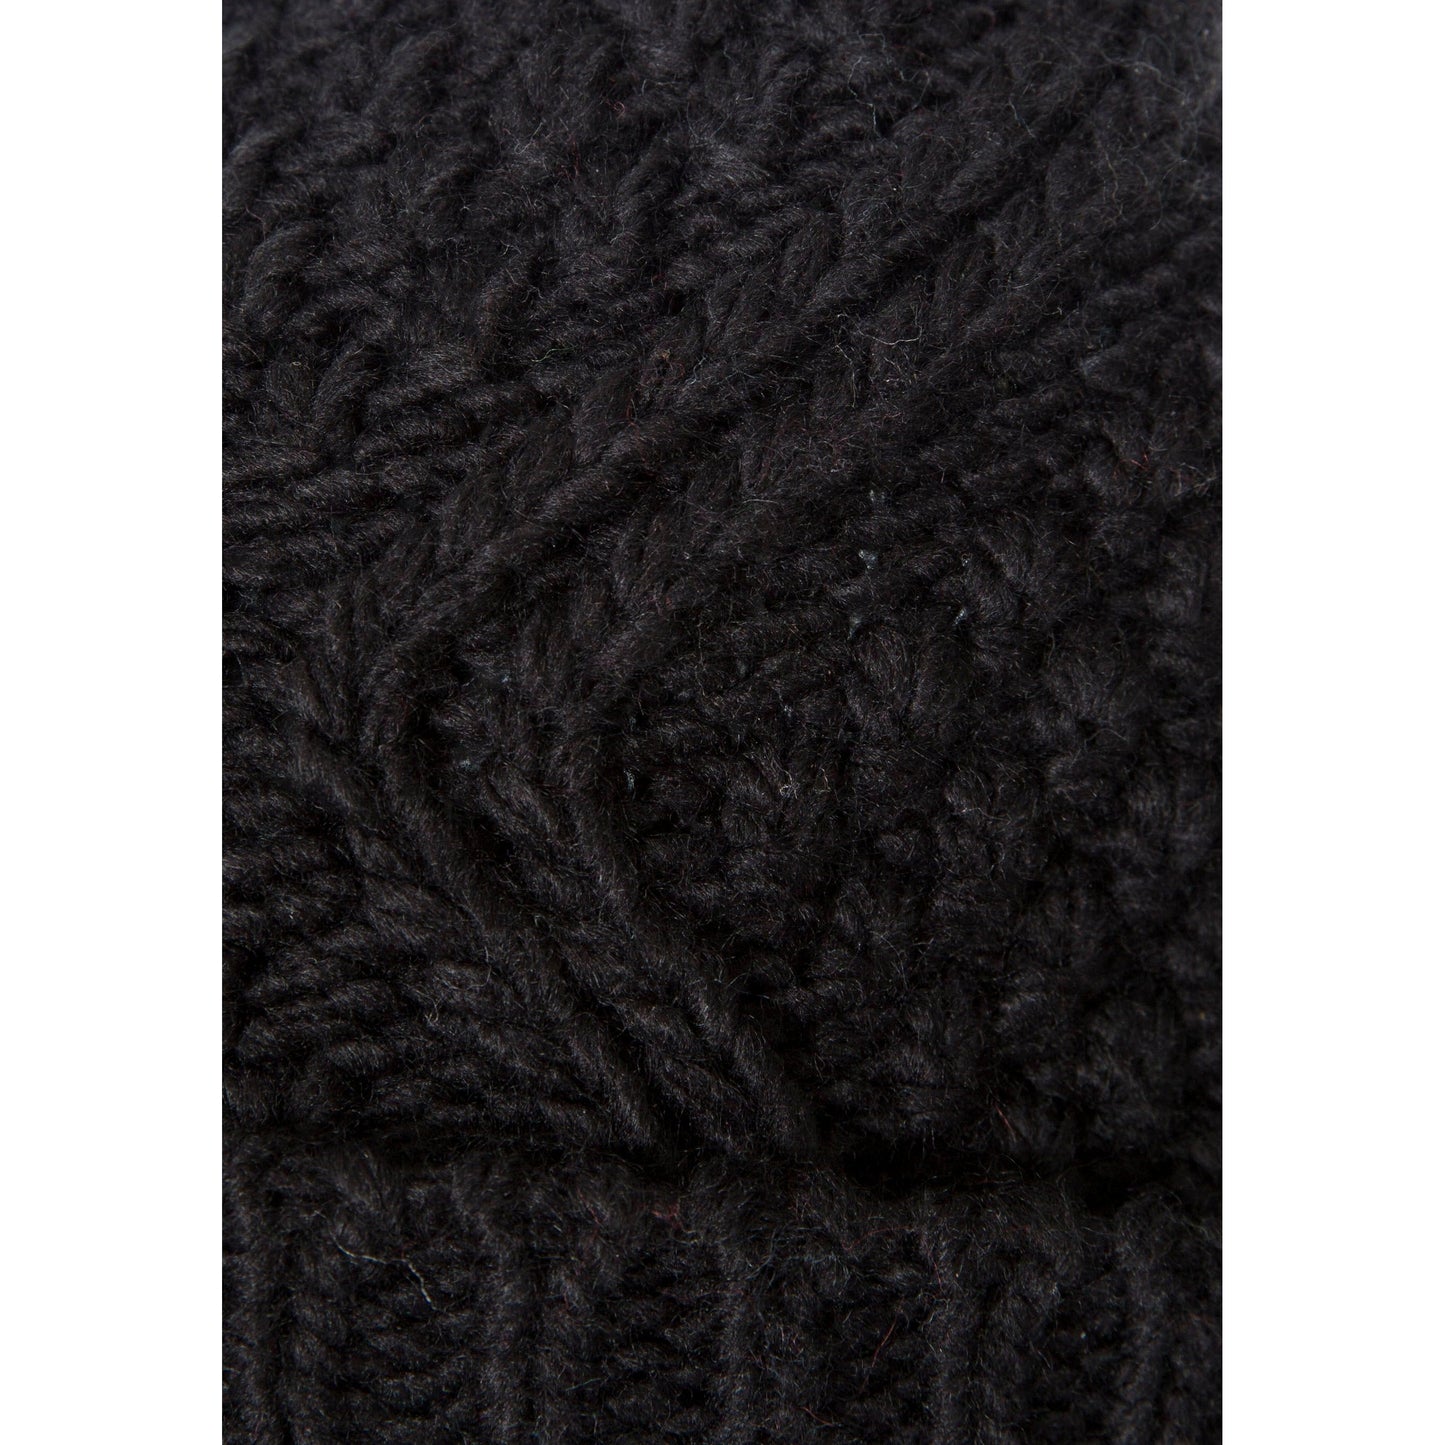 Zyra Women's Knitted Bobble Hat in Black with Fleece Lining